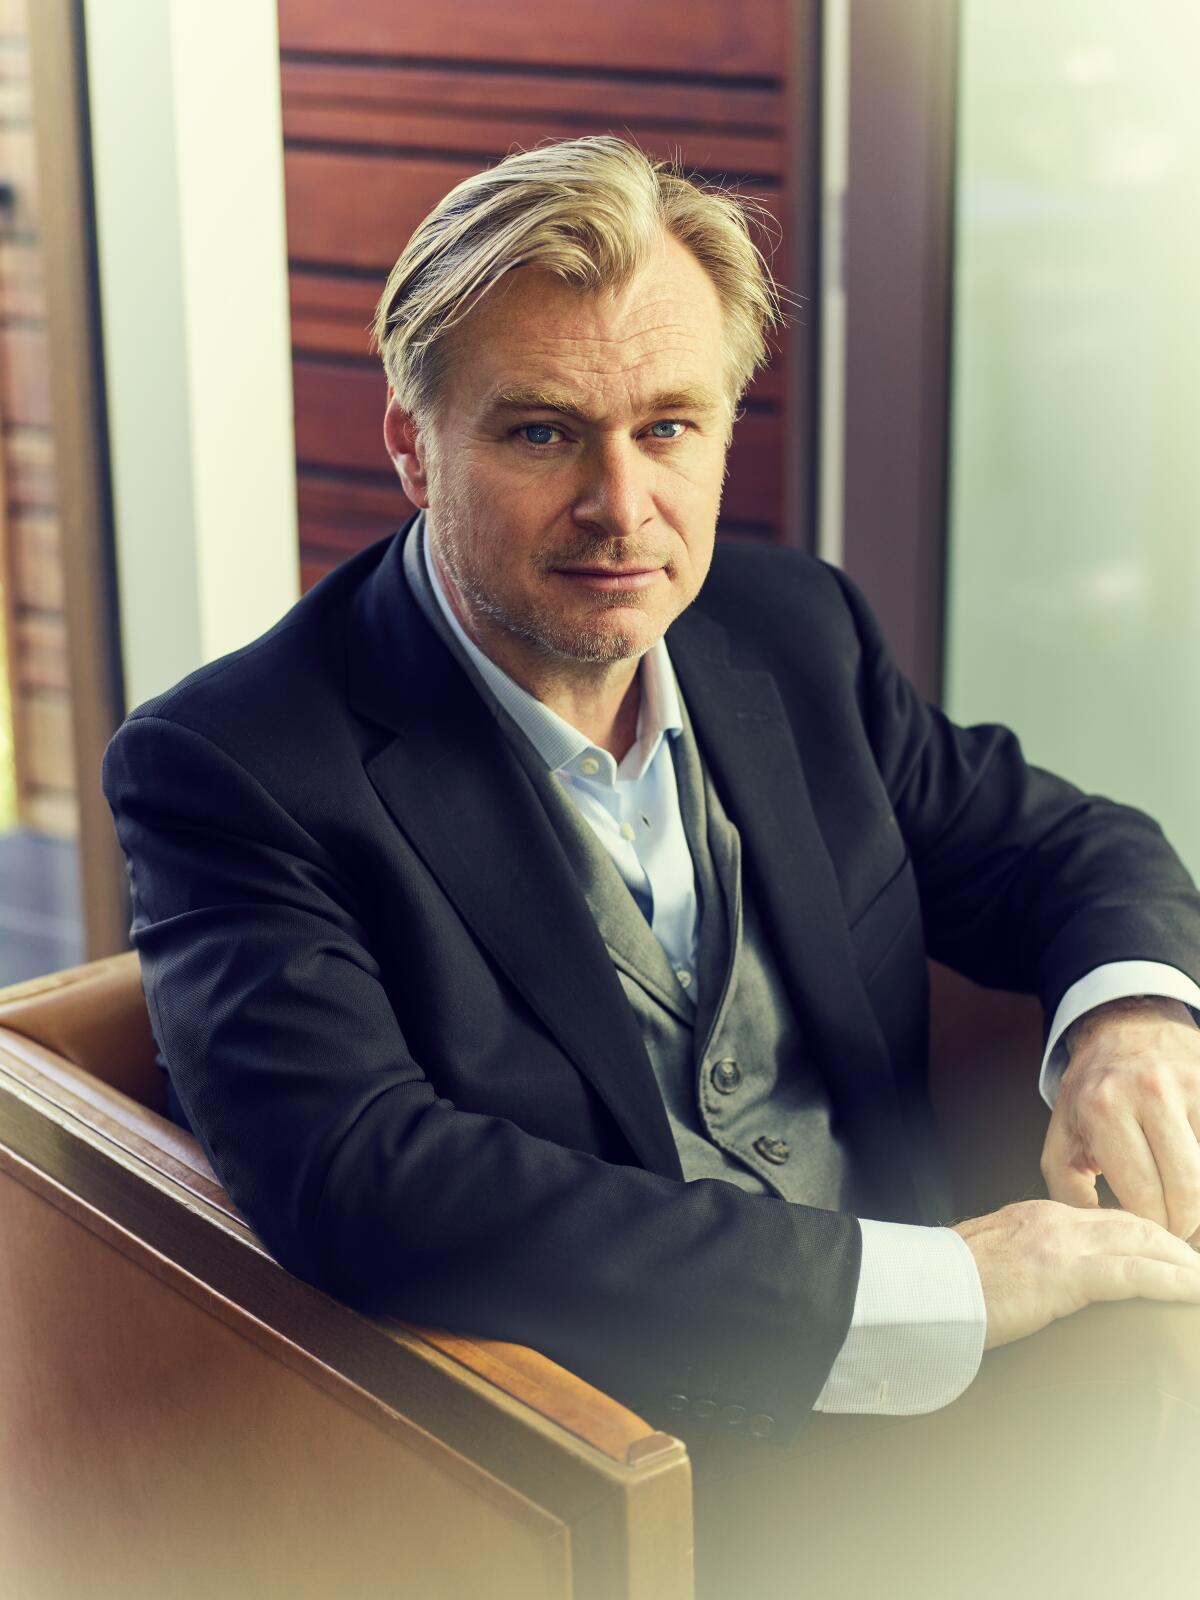 Christopher Nolan sits in a chair with his hands on his knee.